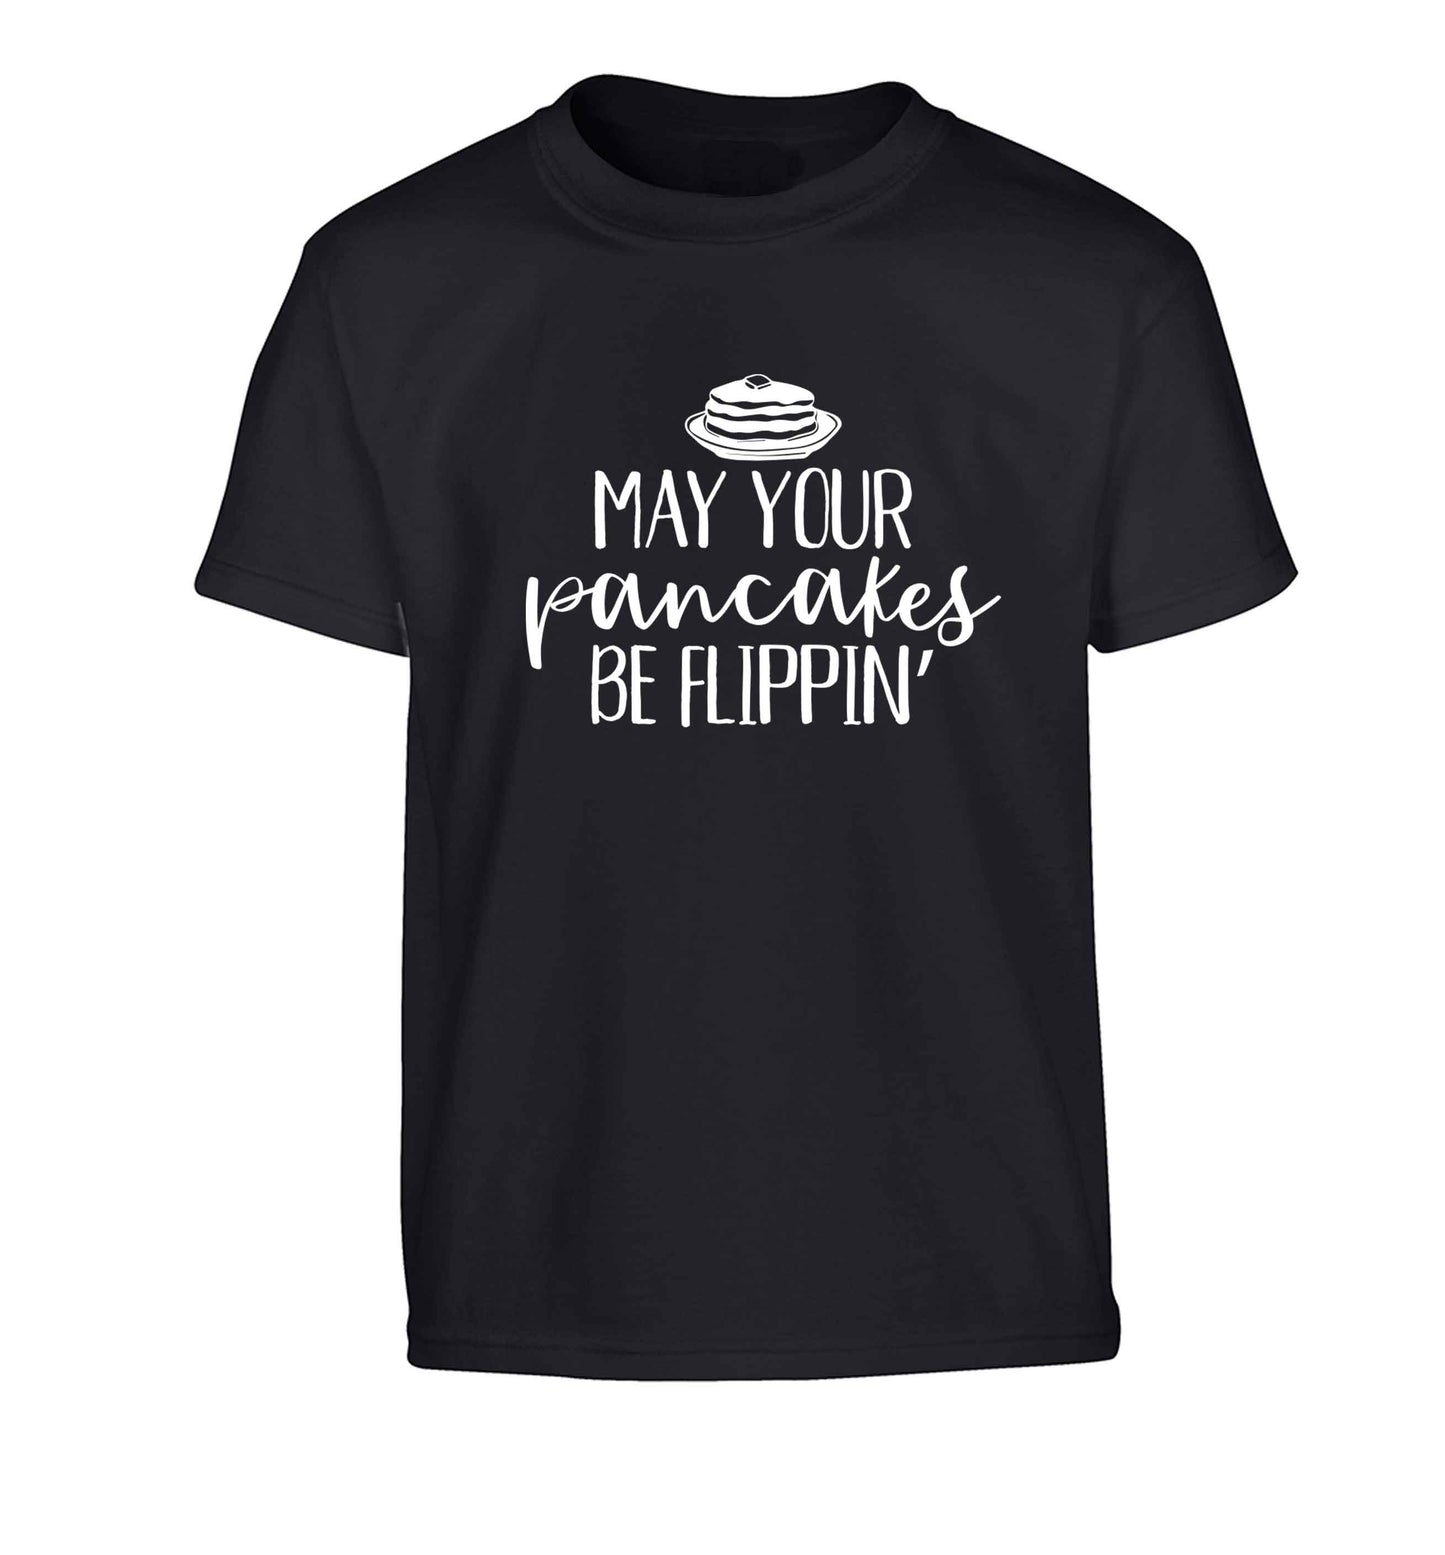 May your pancakes be flippin' Children's black Tshirt 12-13 Years